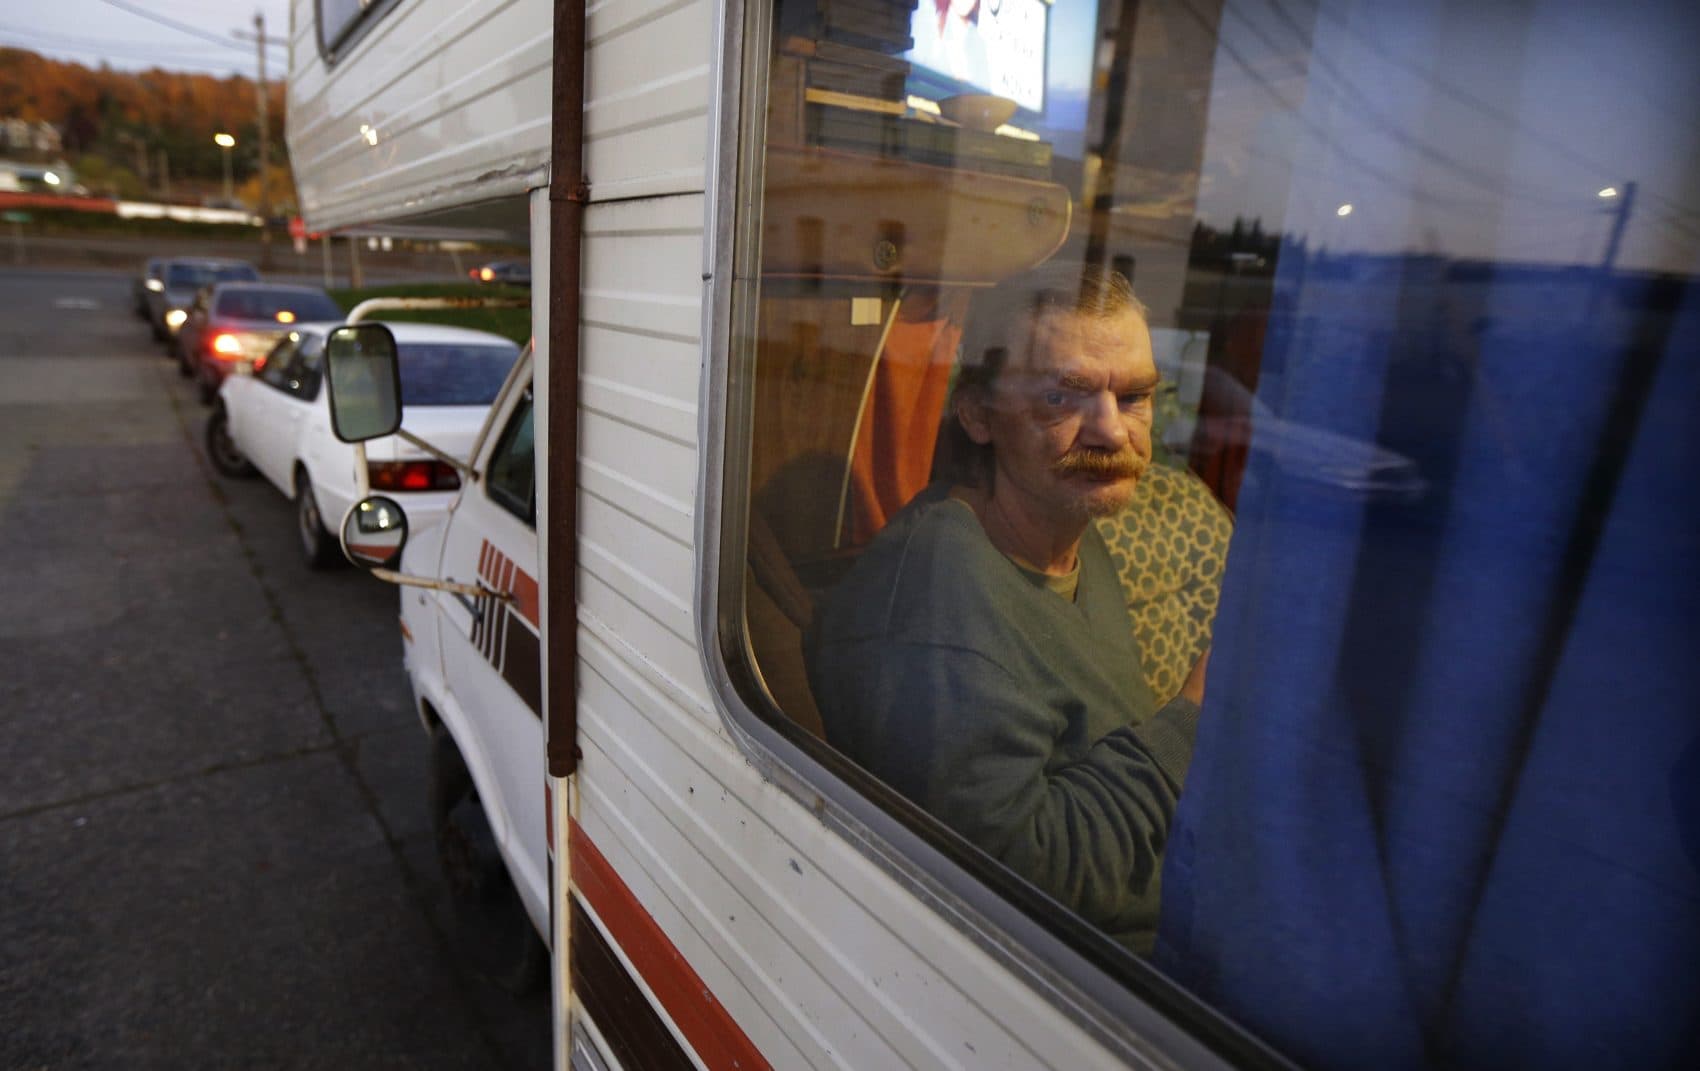 In this Oct. 30, 2017 photo, Stanley Timmings looks out of the window of the RV where he lives with his girlfriend on the streets of Seattle. Earlier in the year, the couple lost the room they were renting in a house when the owner died of cancer, and they were unable to find another room or an apartment that they could afford, so they bought the RV for $300. In Seattle, about one-third of unsheltered homeless people live in vehicles, according to recent homeless counts. (Ted S. Warren/AP)